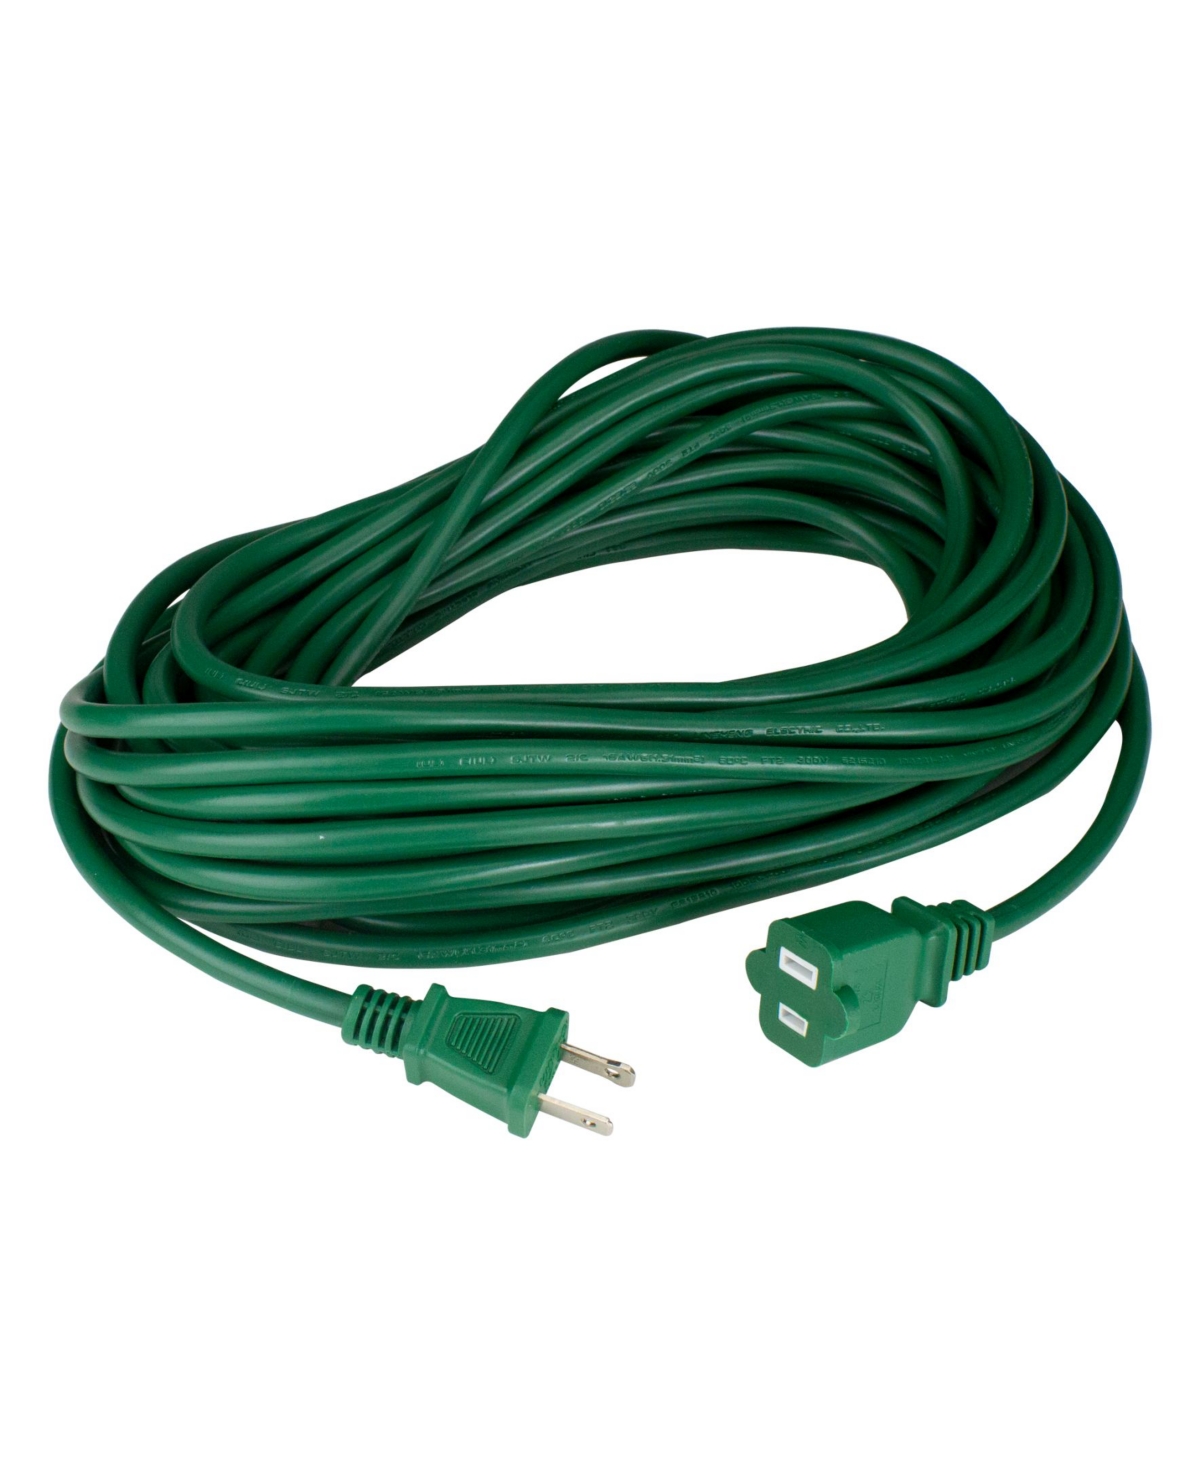 Northlight 40' 2-prong Outdoor Extension Power Cord With End Connector In Multi-colored